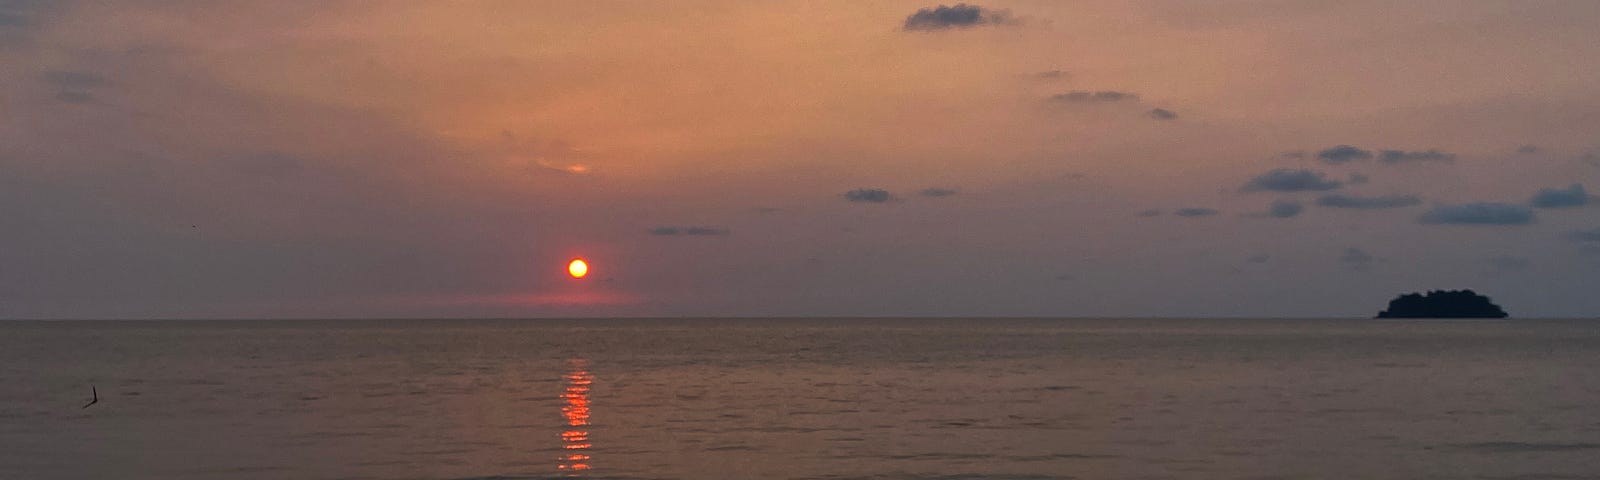 Sunset over the sea. Small orange sun is almost at the horizon, reflected in the water. A small island is on the right side of the photo on the horizon. A rocky shore is in the foreground.